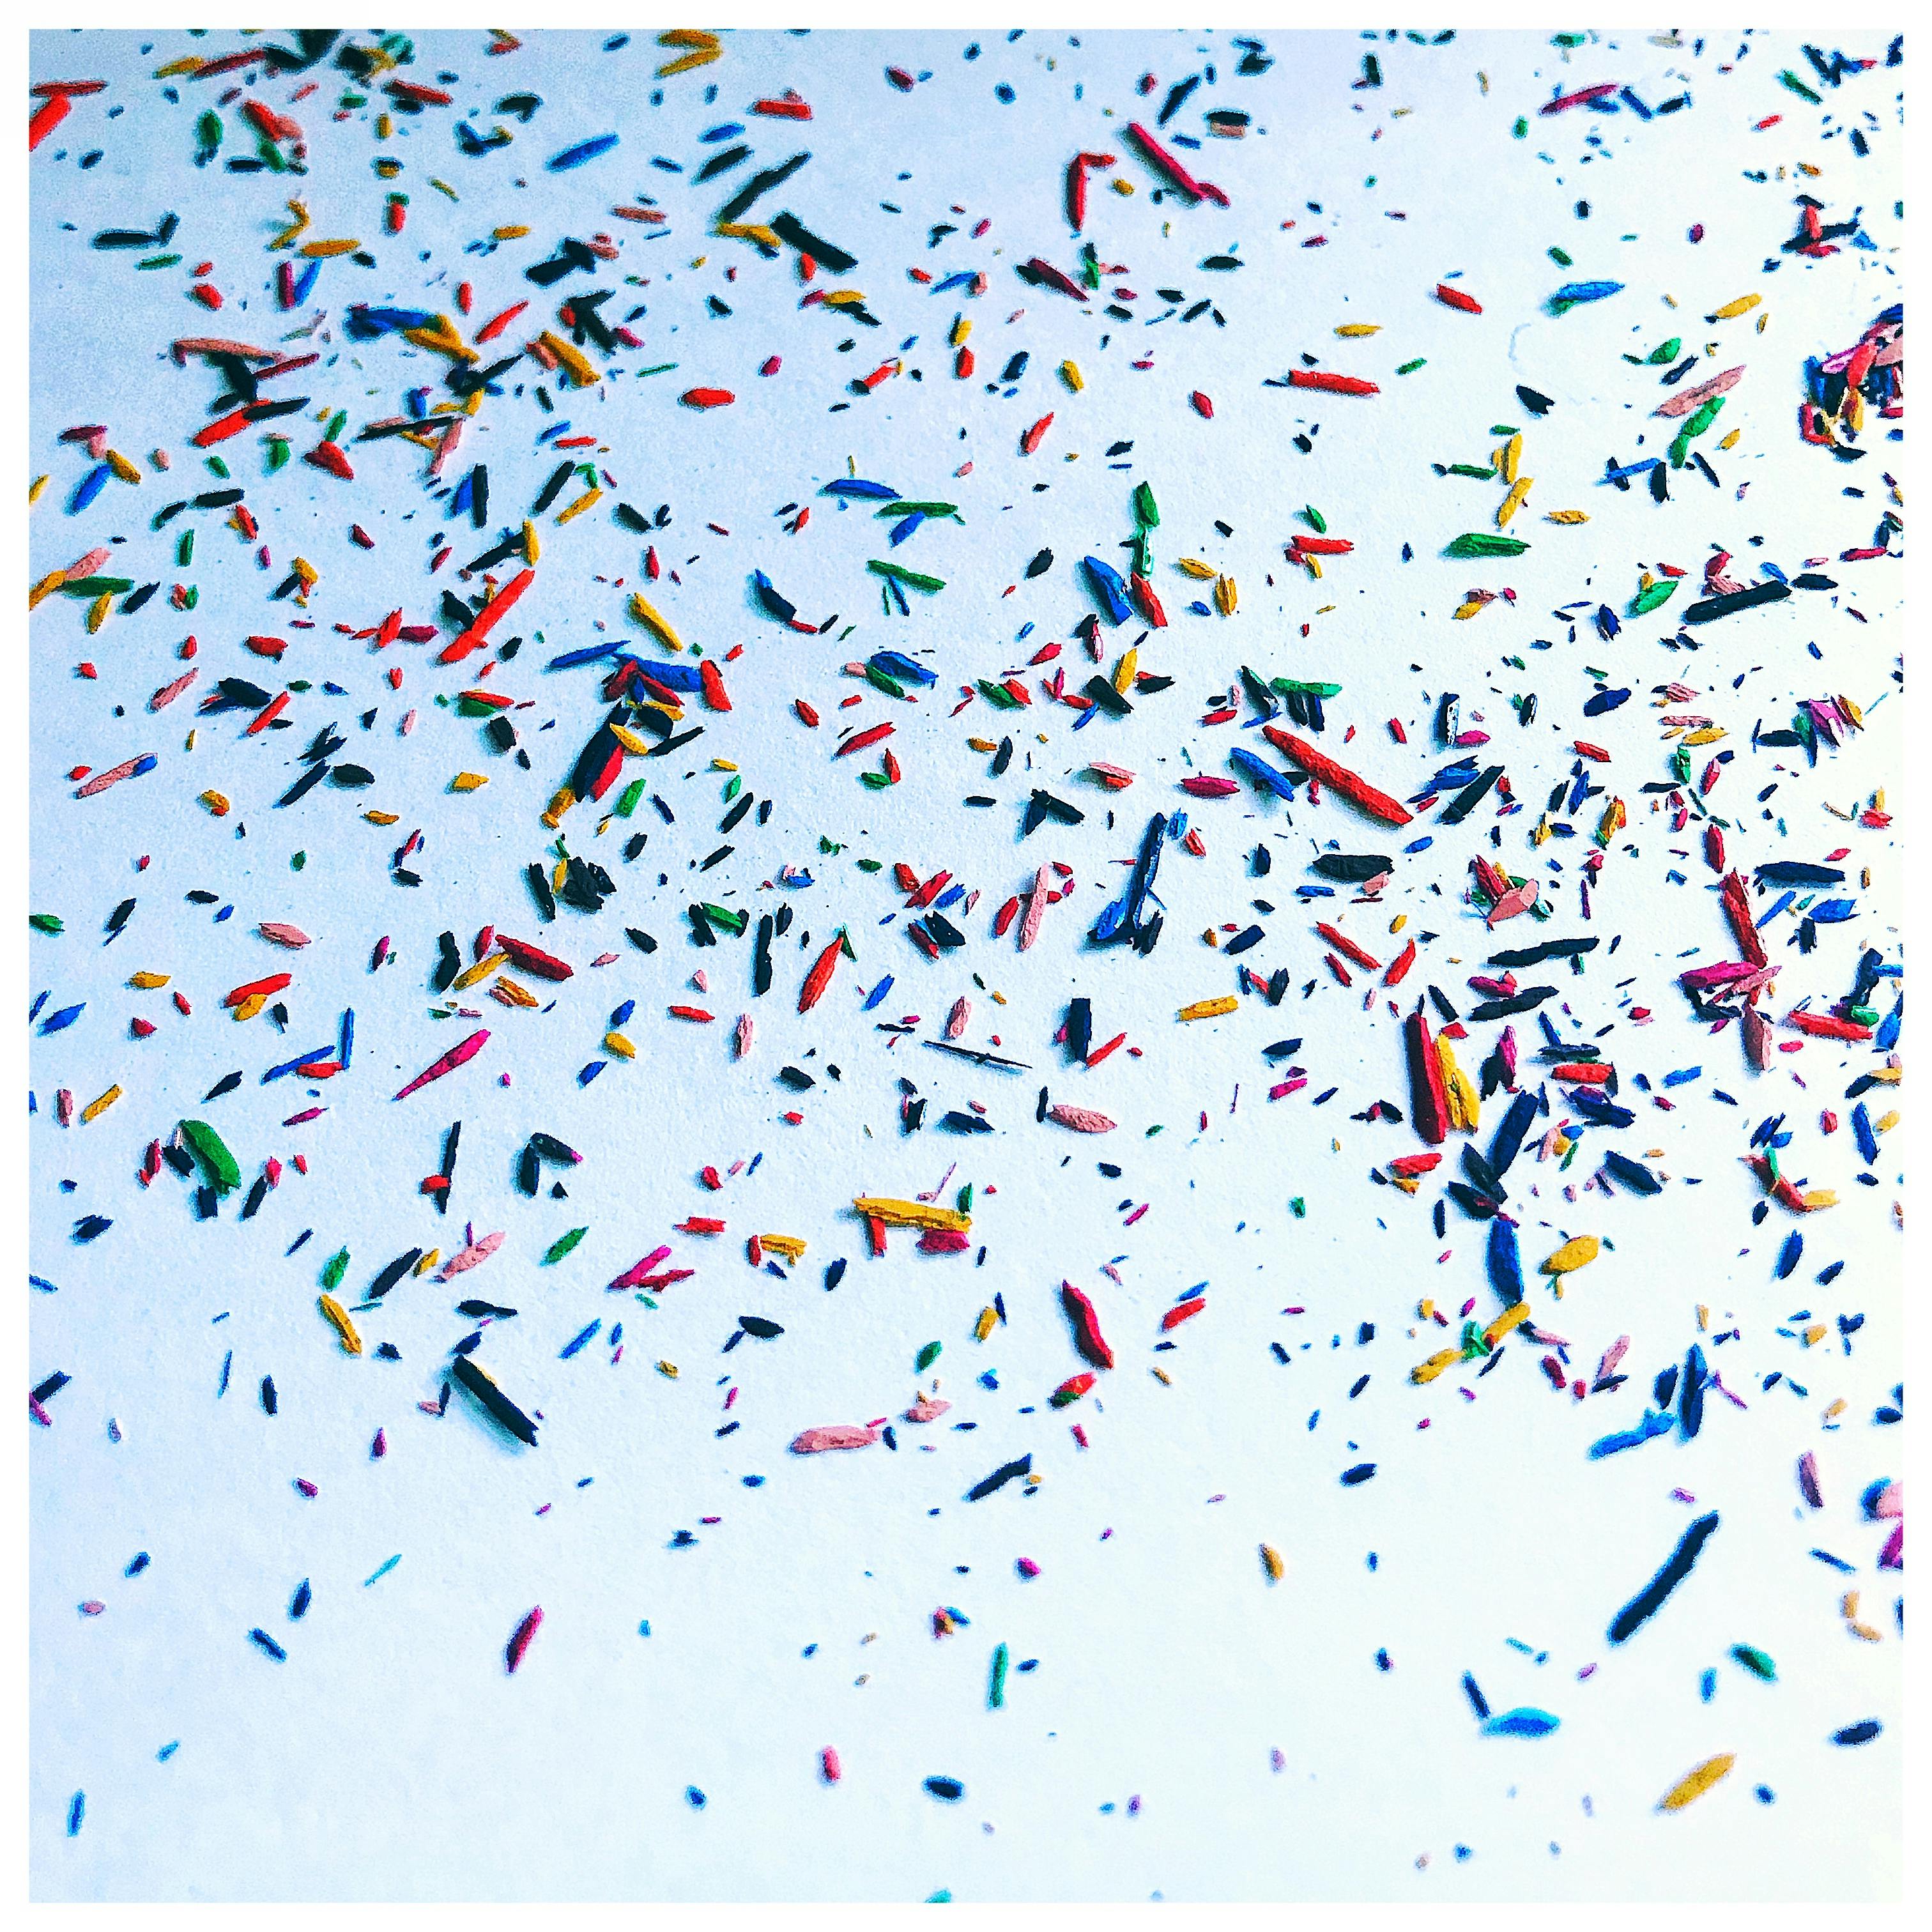 Best 500 Confetti Pictures  Download Free Images on Unsplash